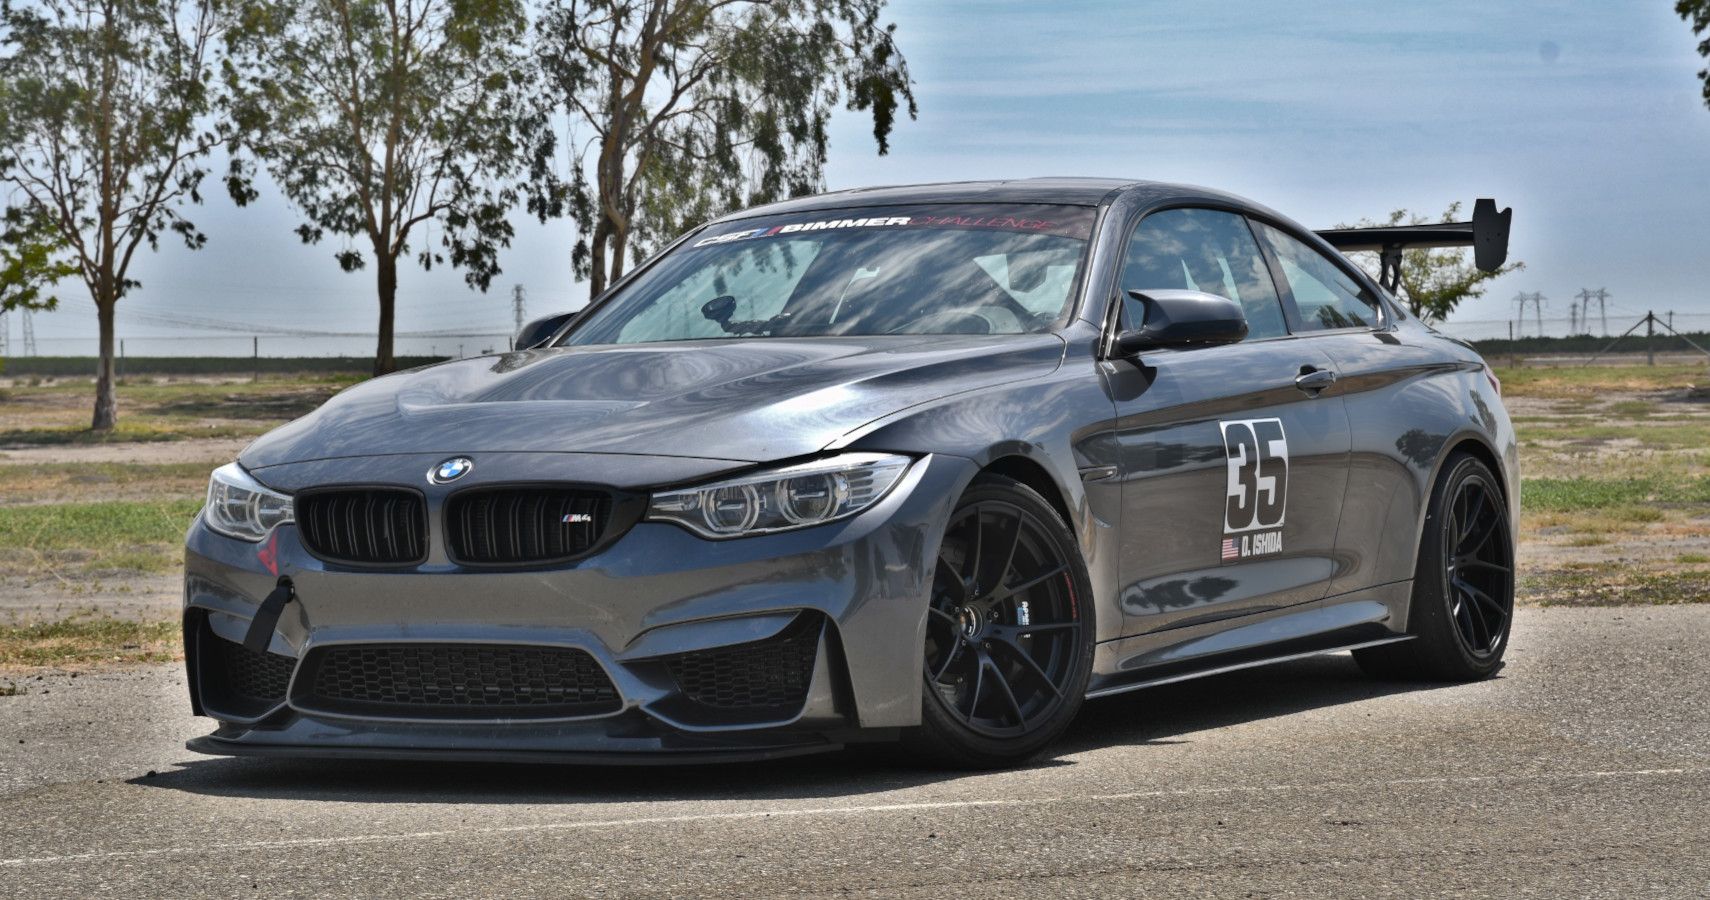 The BMW M4 GTS Is The Track Day Junkie's Dream Build From The Factory